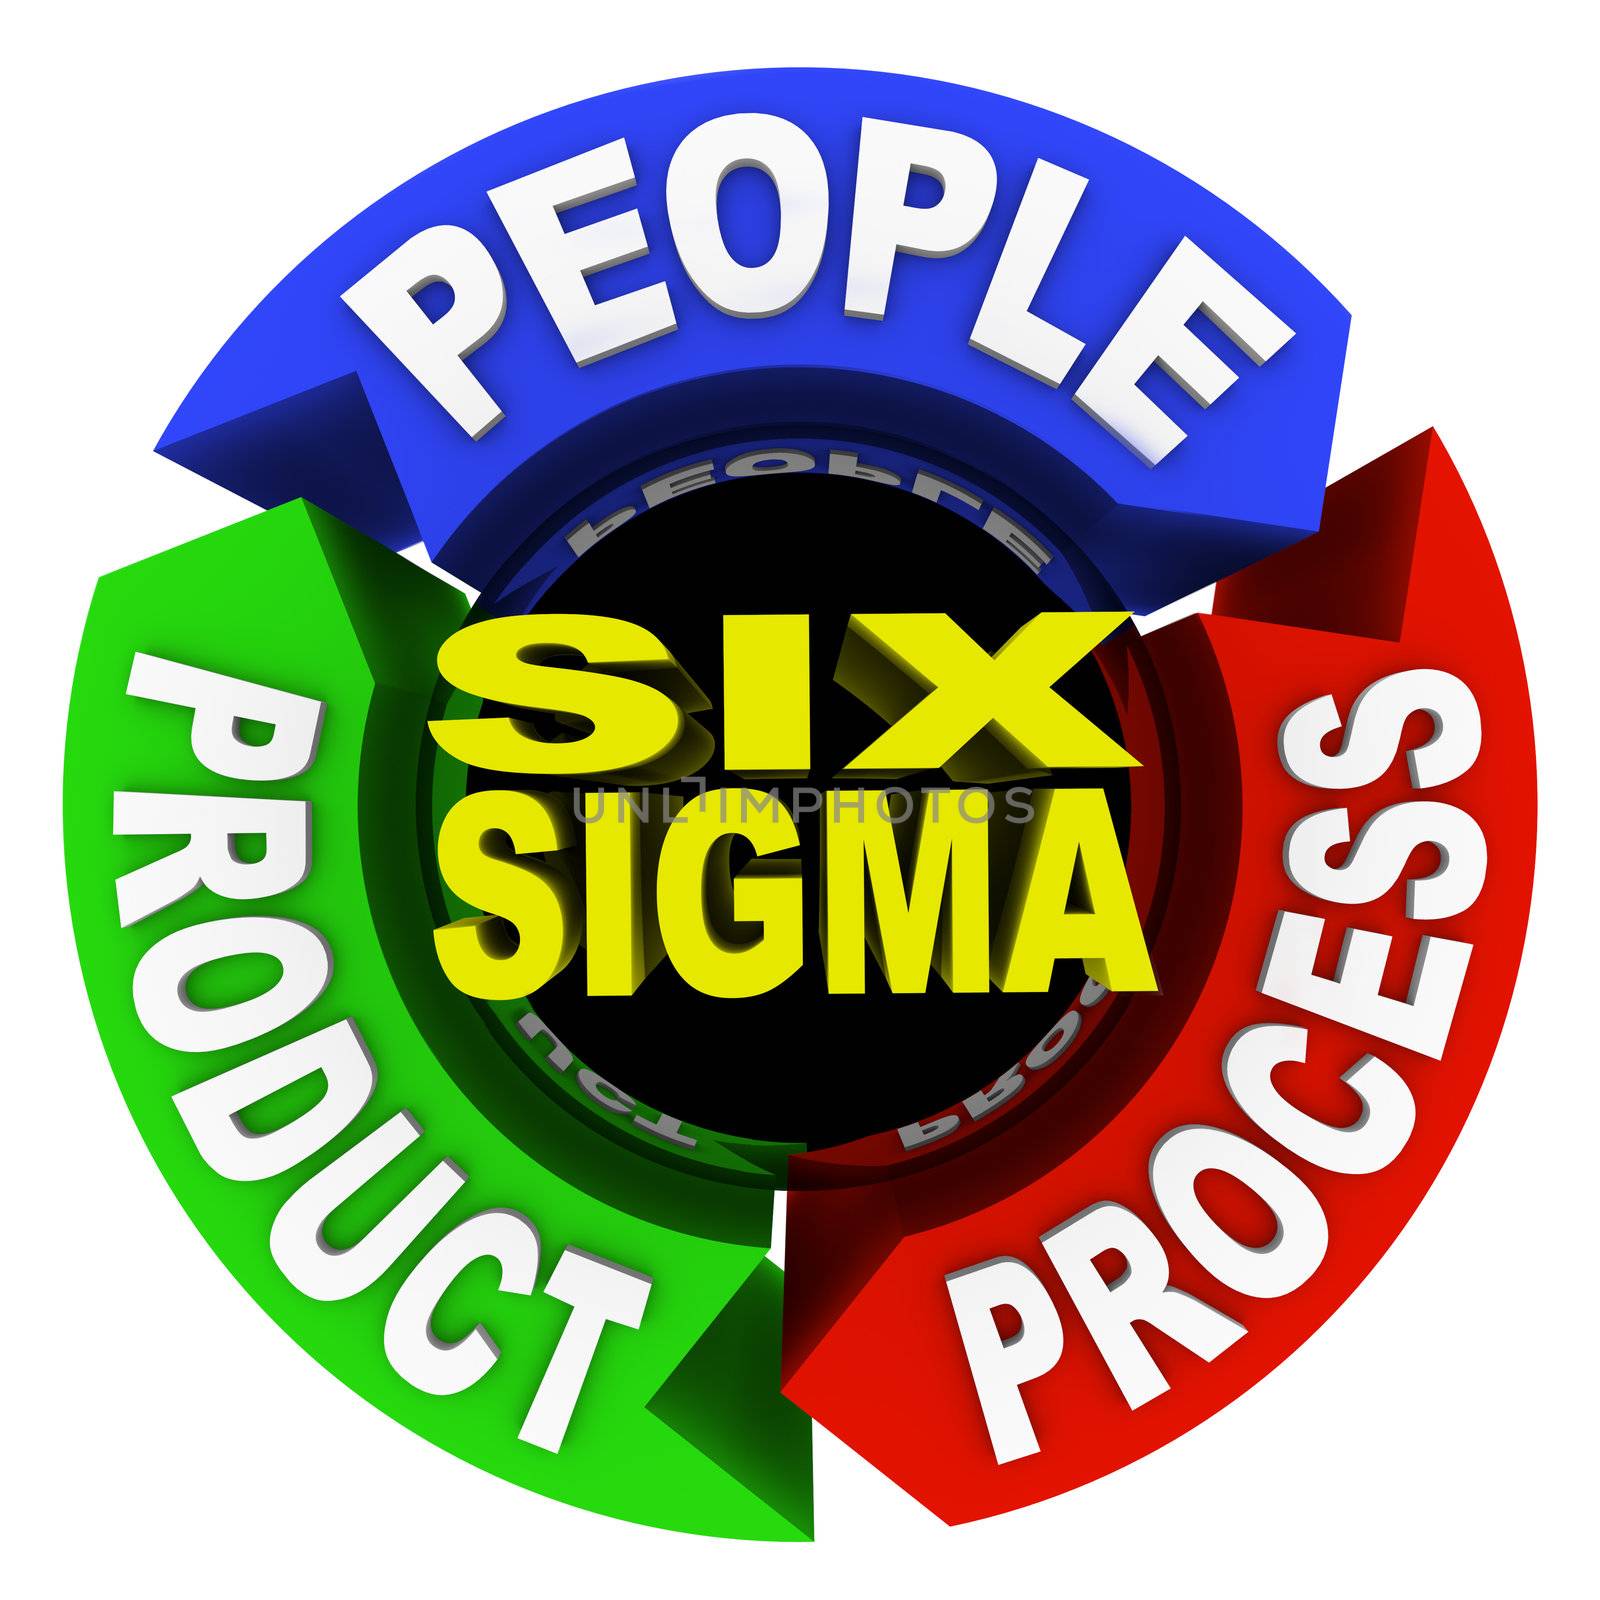 The three core principles of Six Sigma training and certification -- people, product and process -- written on arrows in a circular diagram